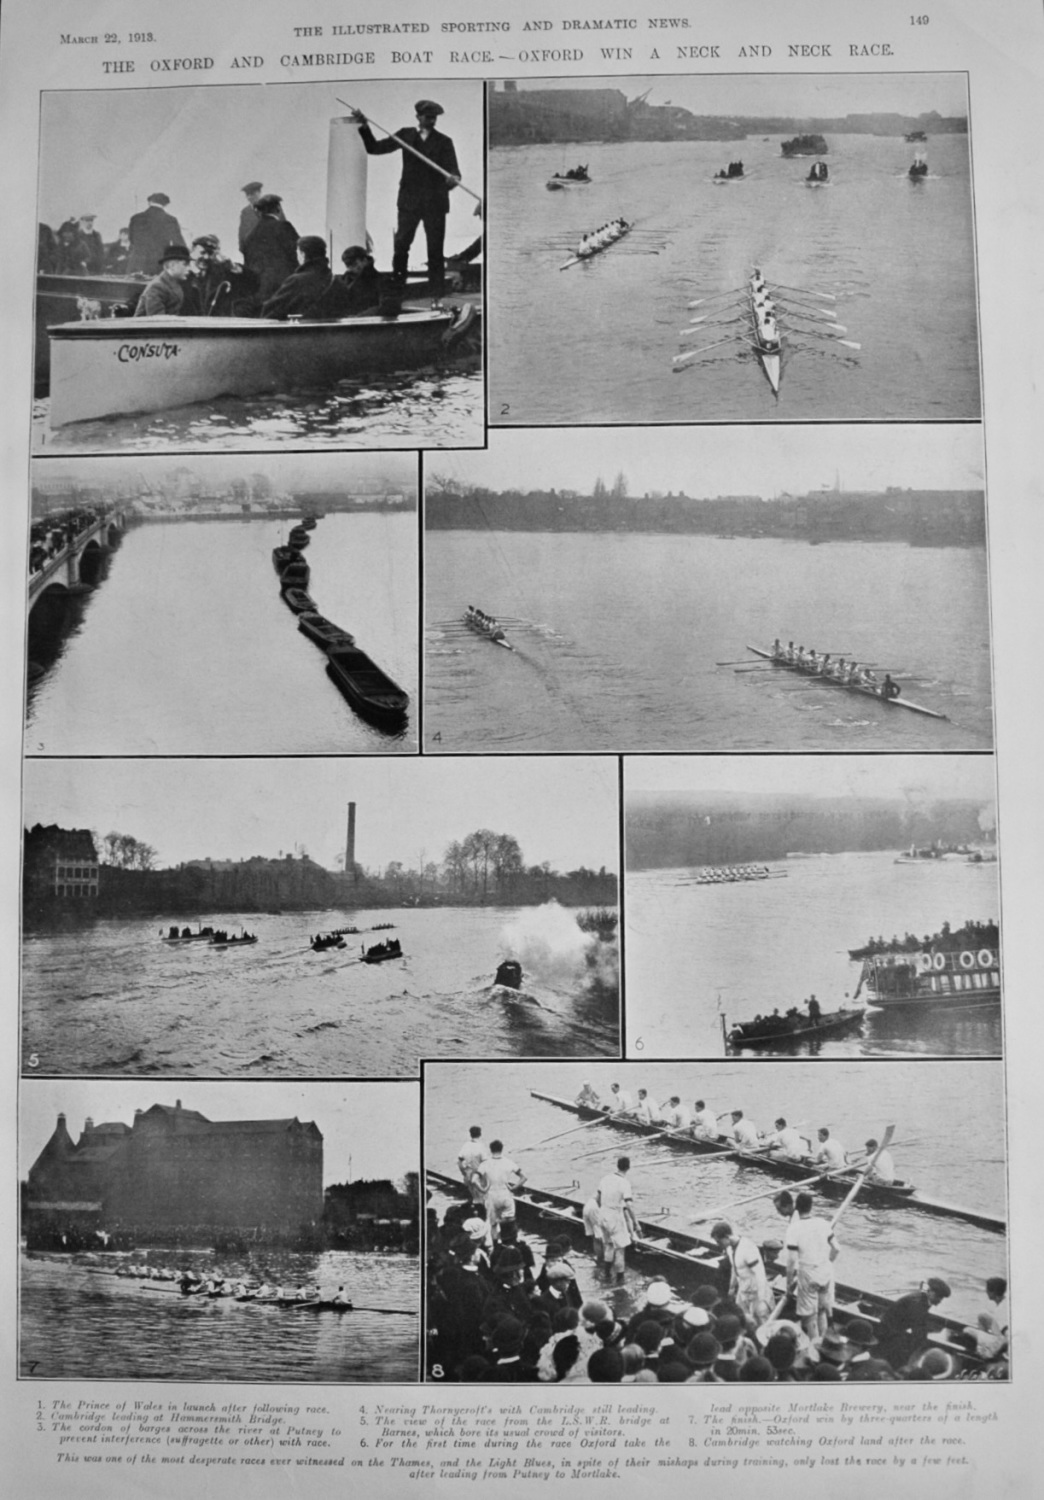 The Oxford and Cambridge Boat Race.- Oxford win a Neck and Neck Race.  1913